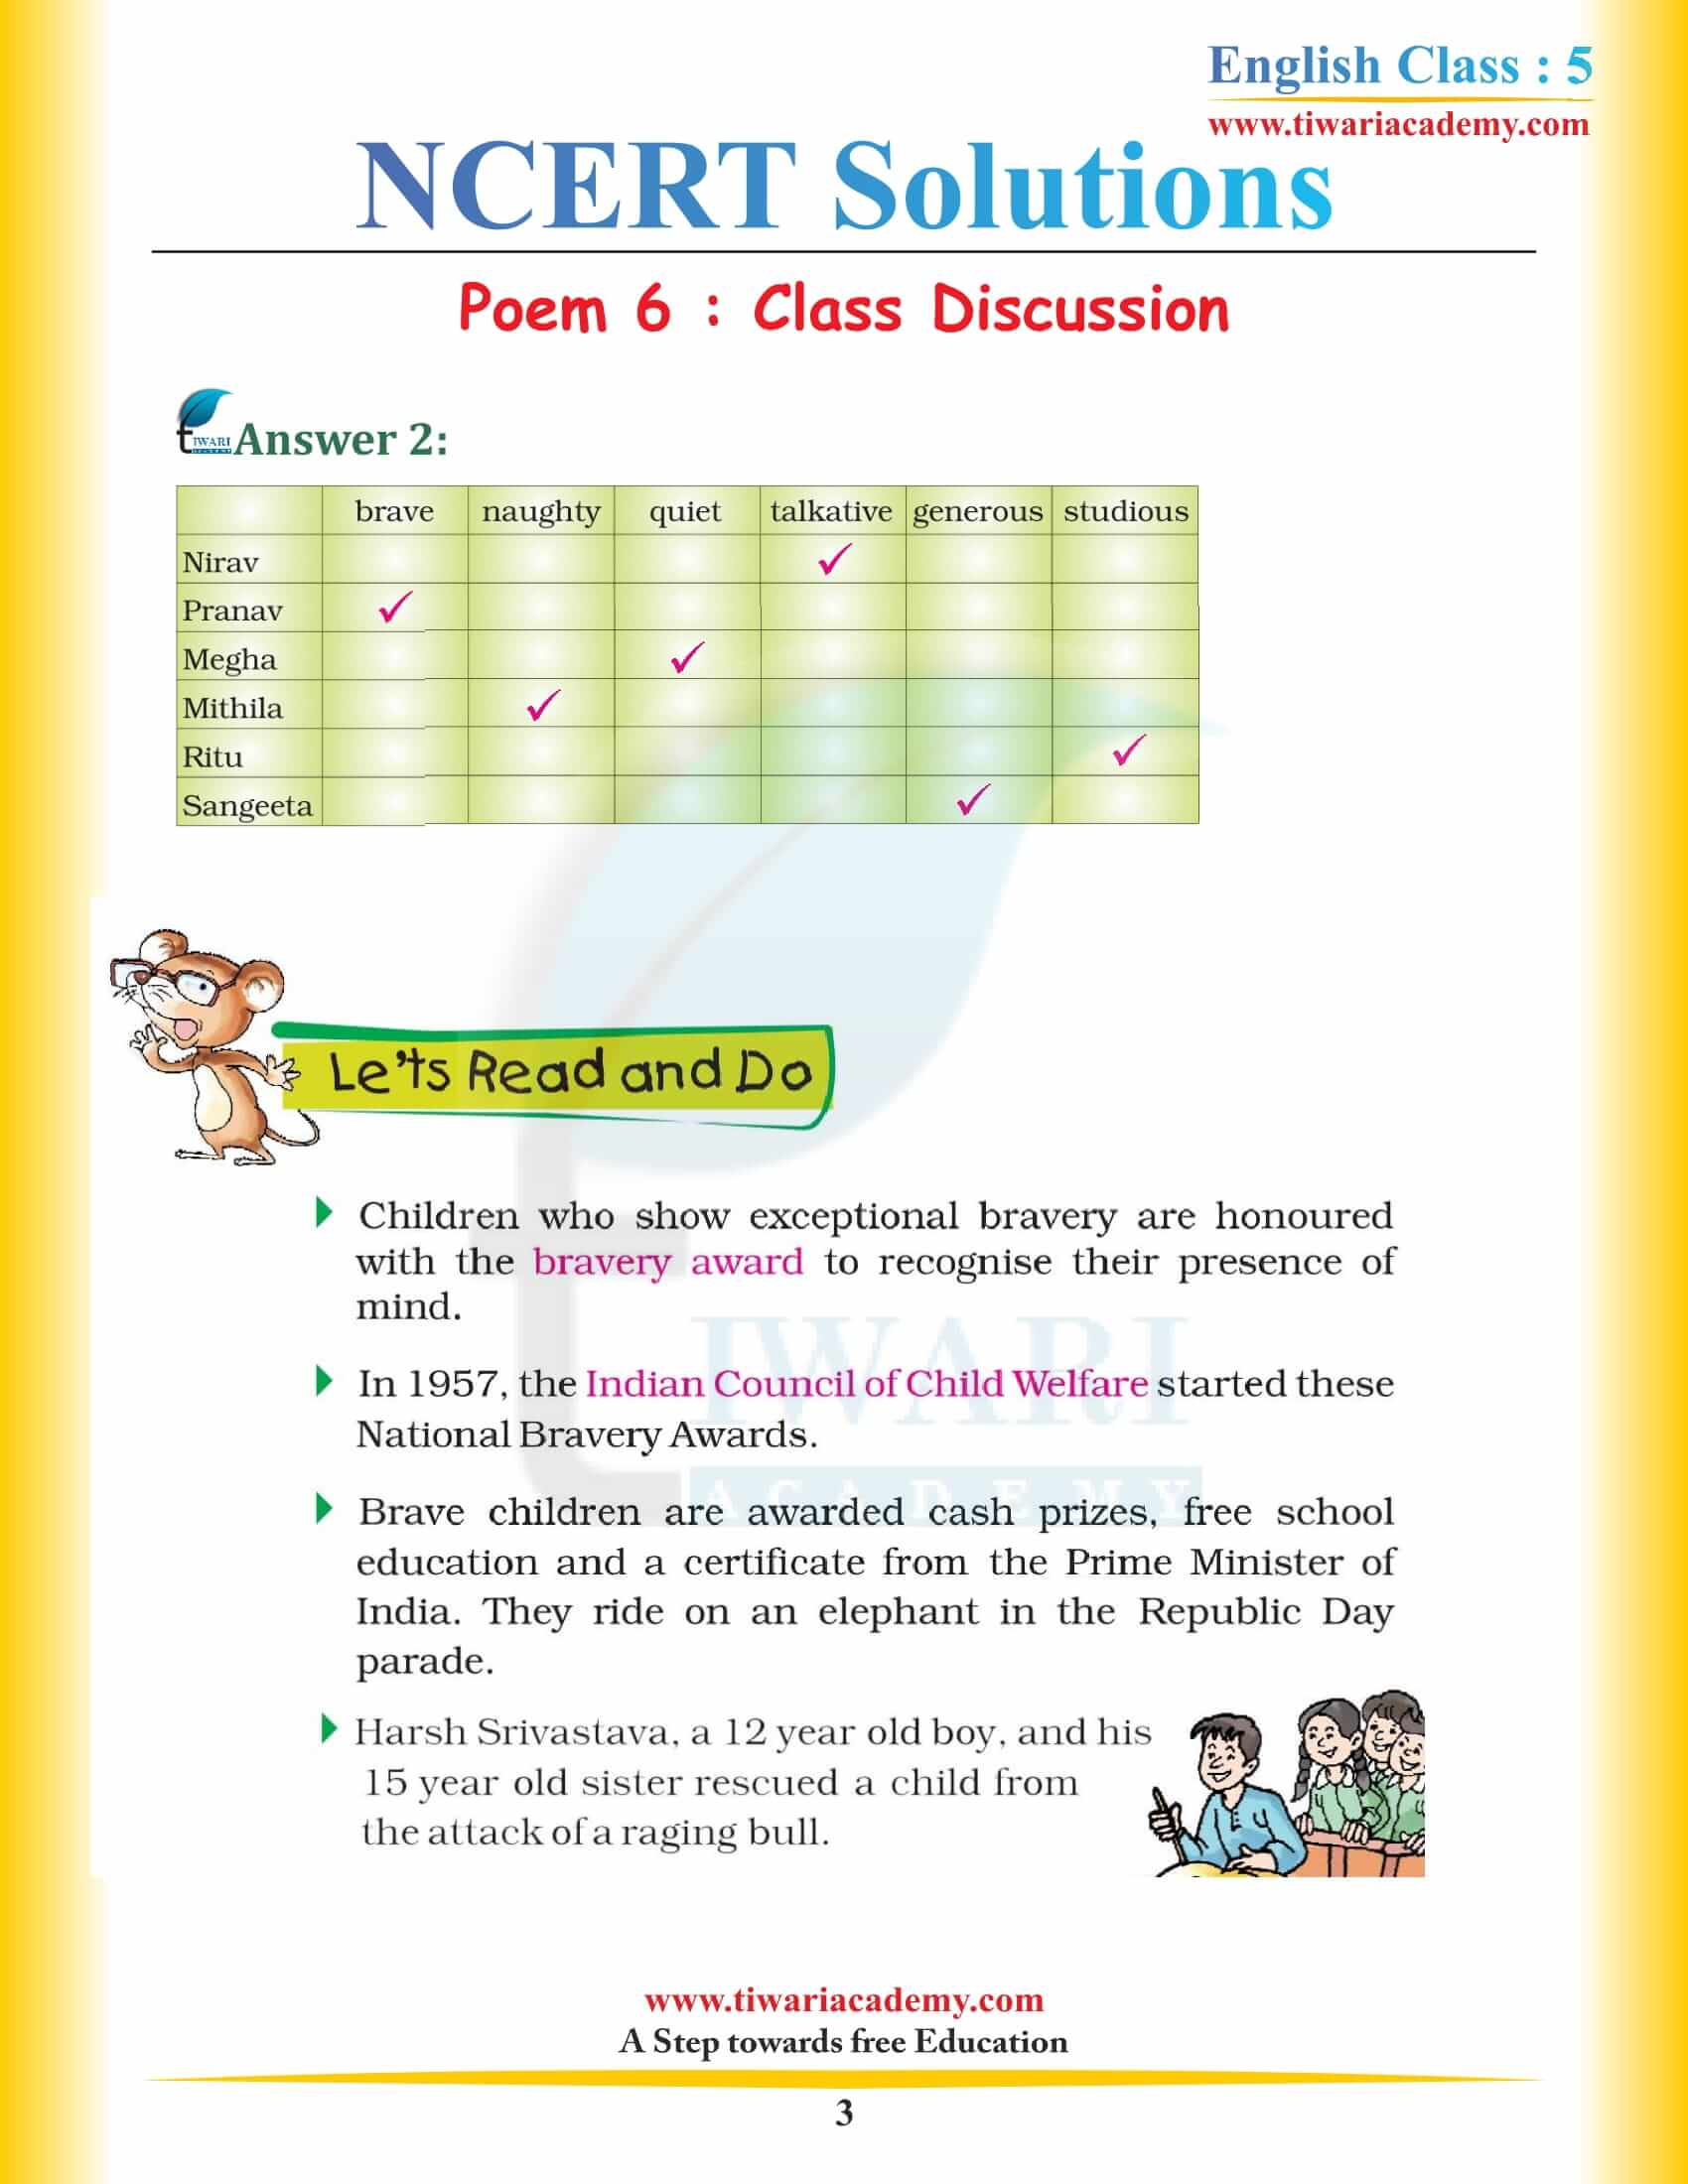 NCERT Solutions for Class 5 English Chapter 6 Class Discussion free download